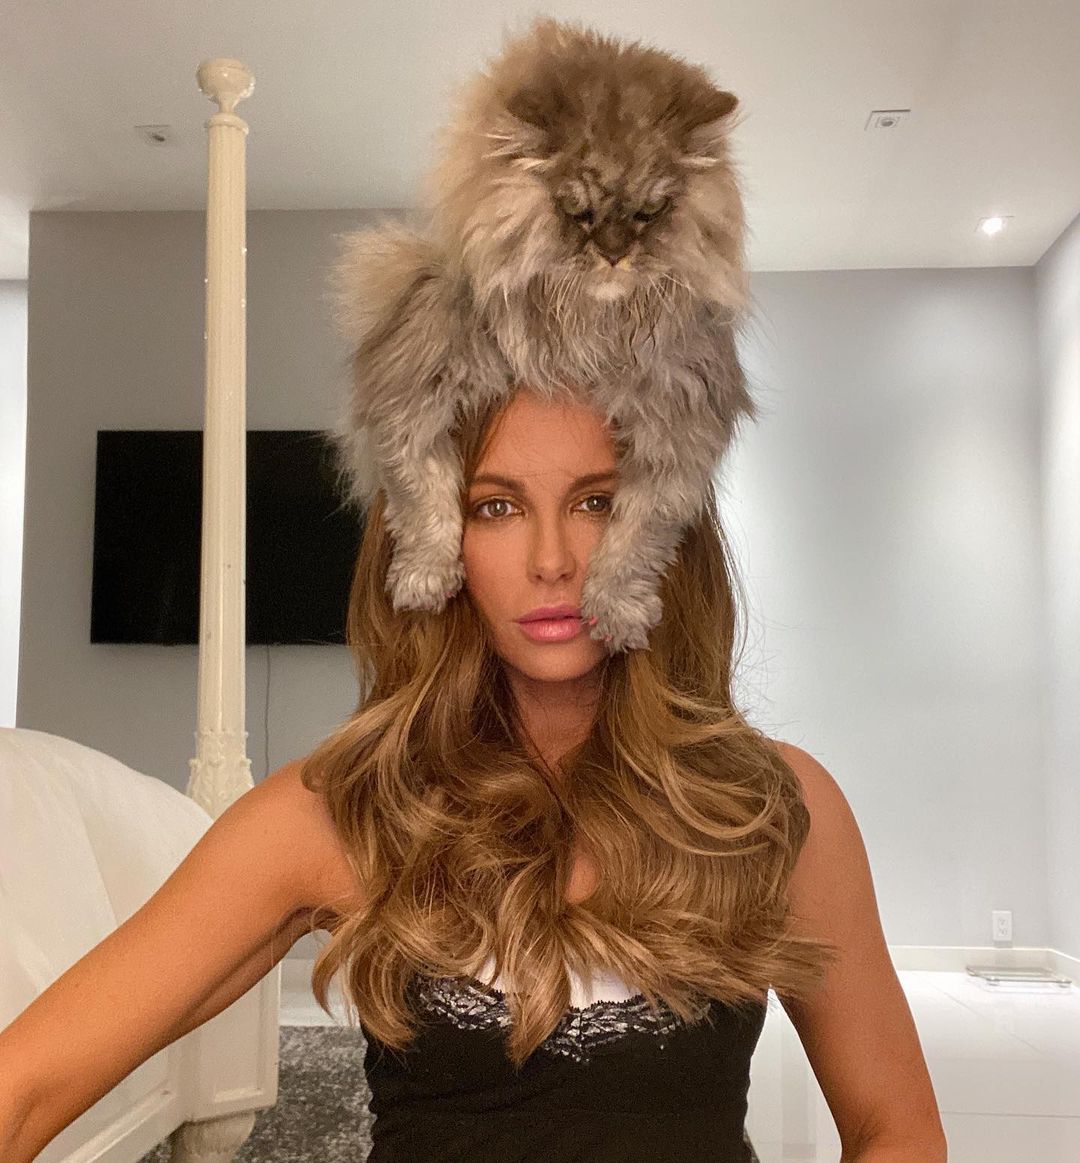 Photos n°2 : Kate Beckinsale’s New Hat is Pretty Epic!